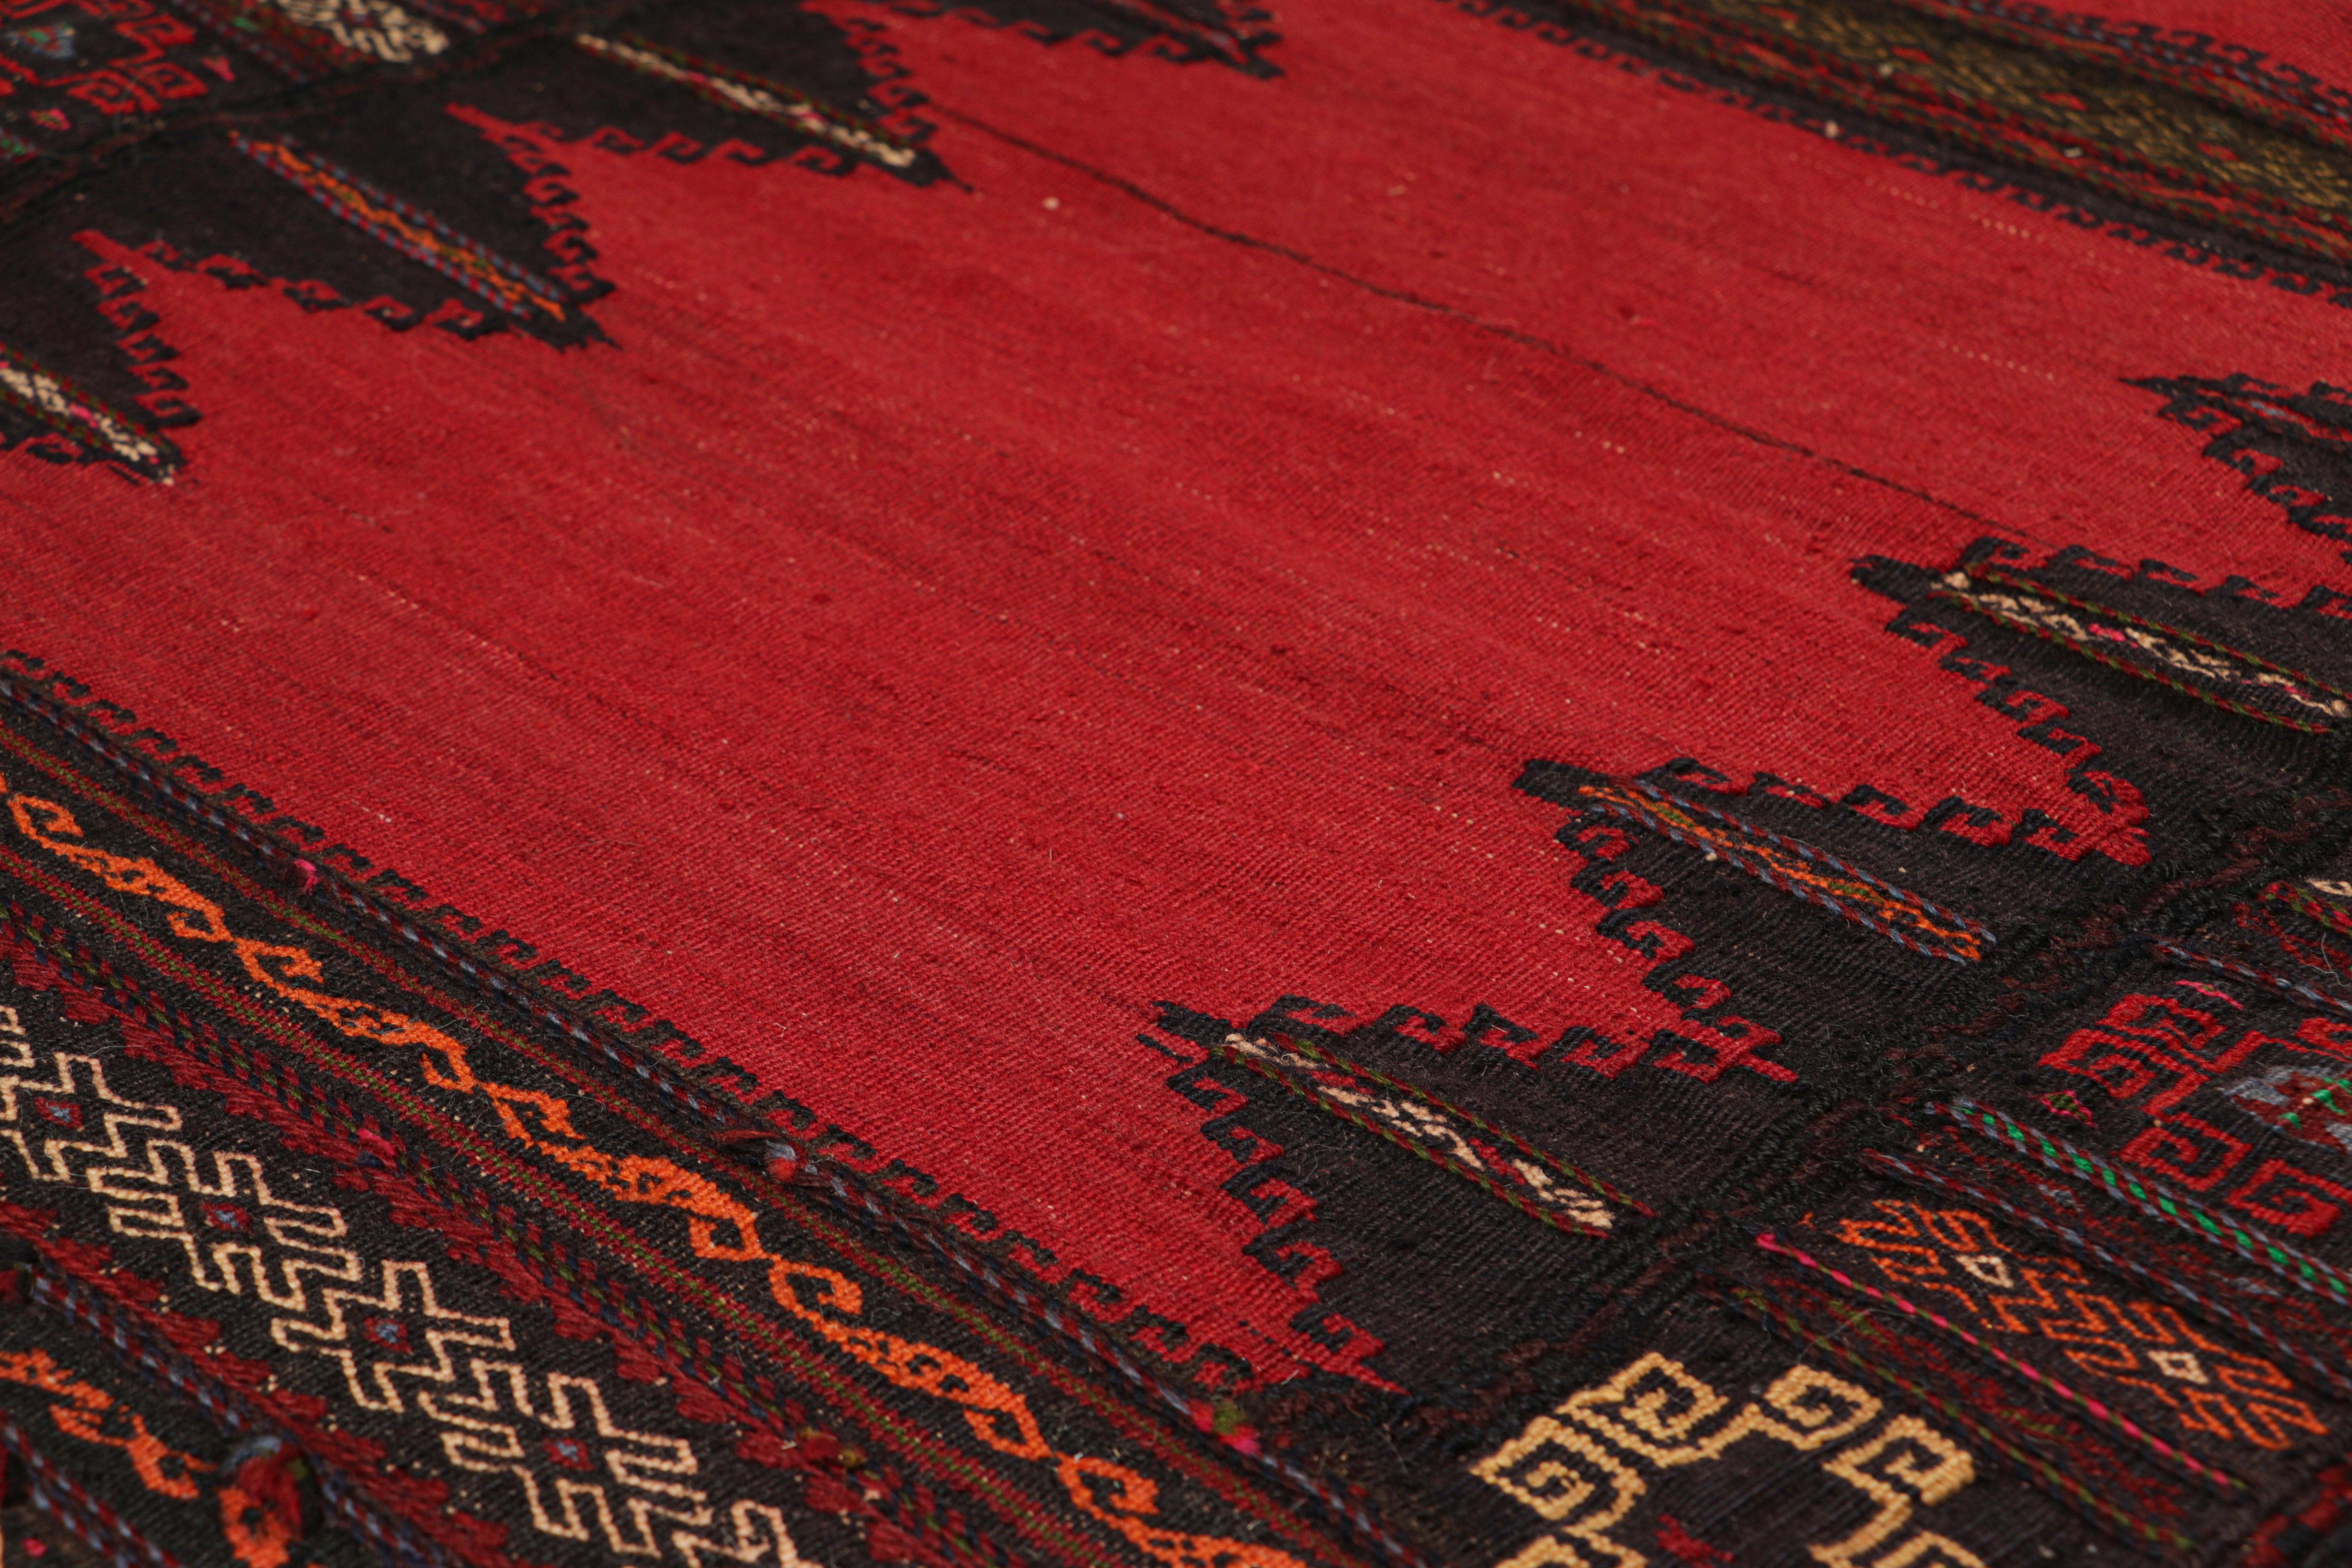 Hand-Woven Vintage Afghan Kilim in Red with Geometric Patterns, from Rug & Kilim For Sale